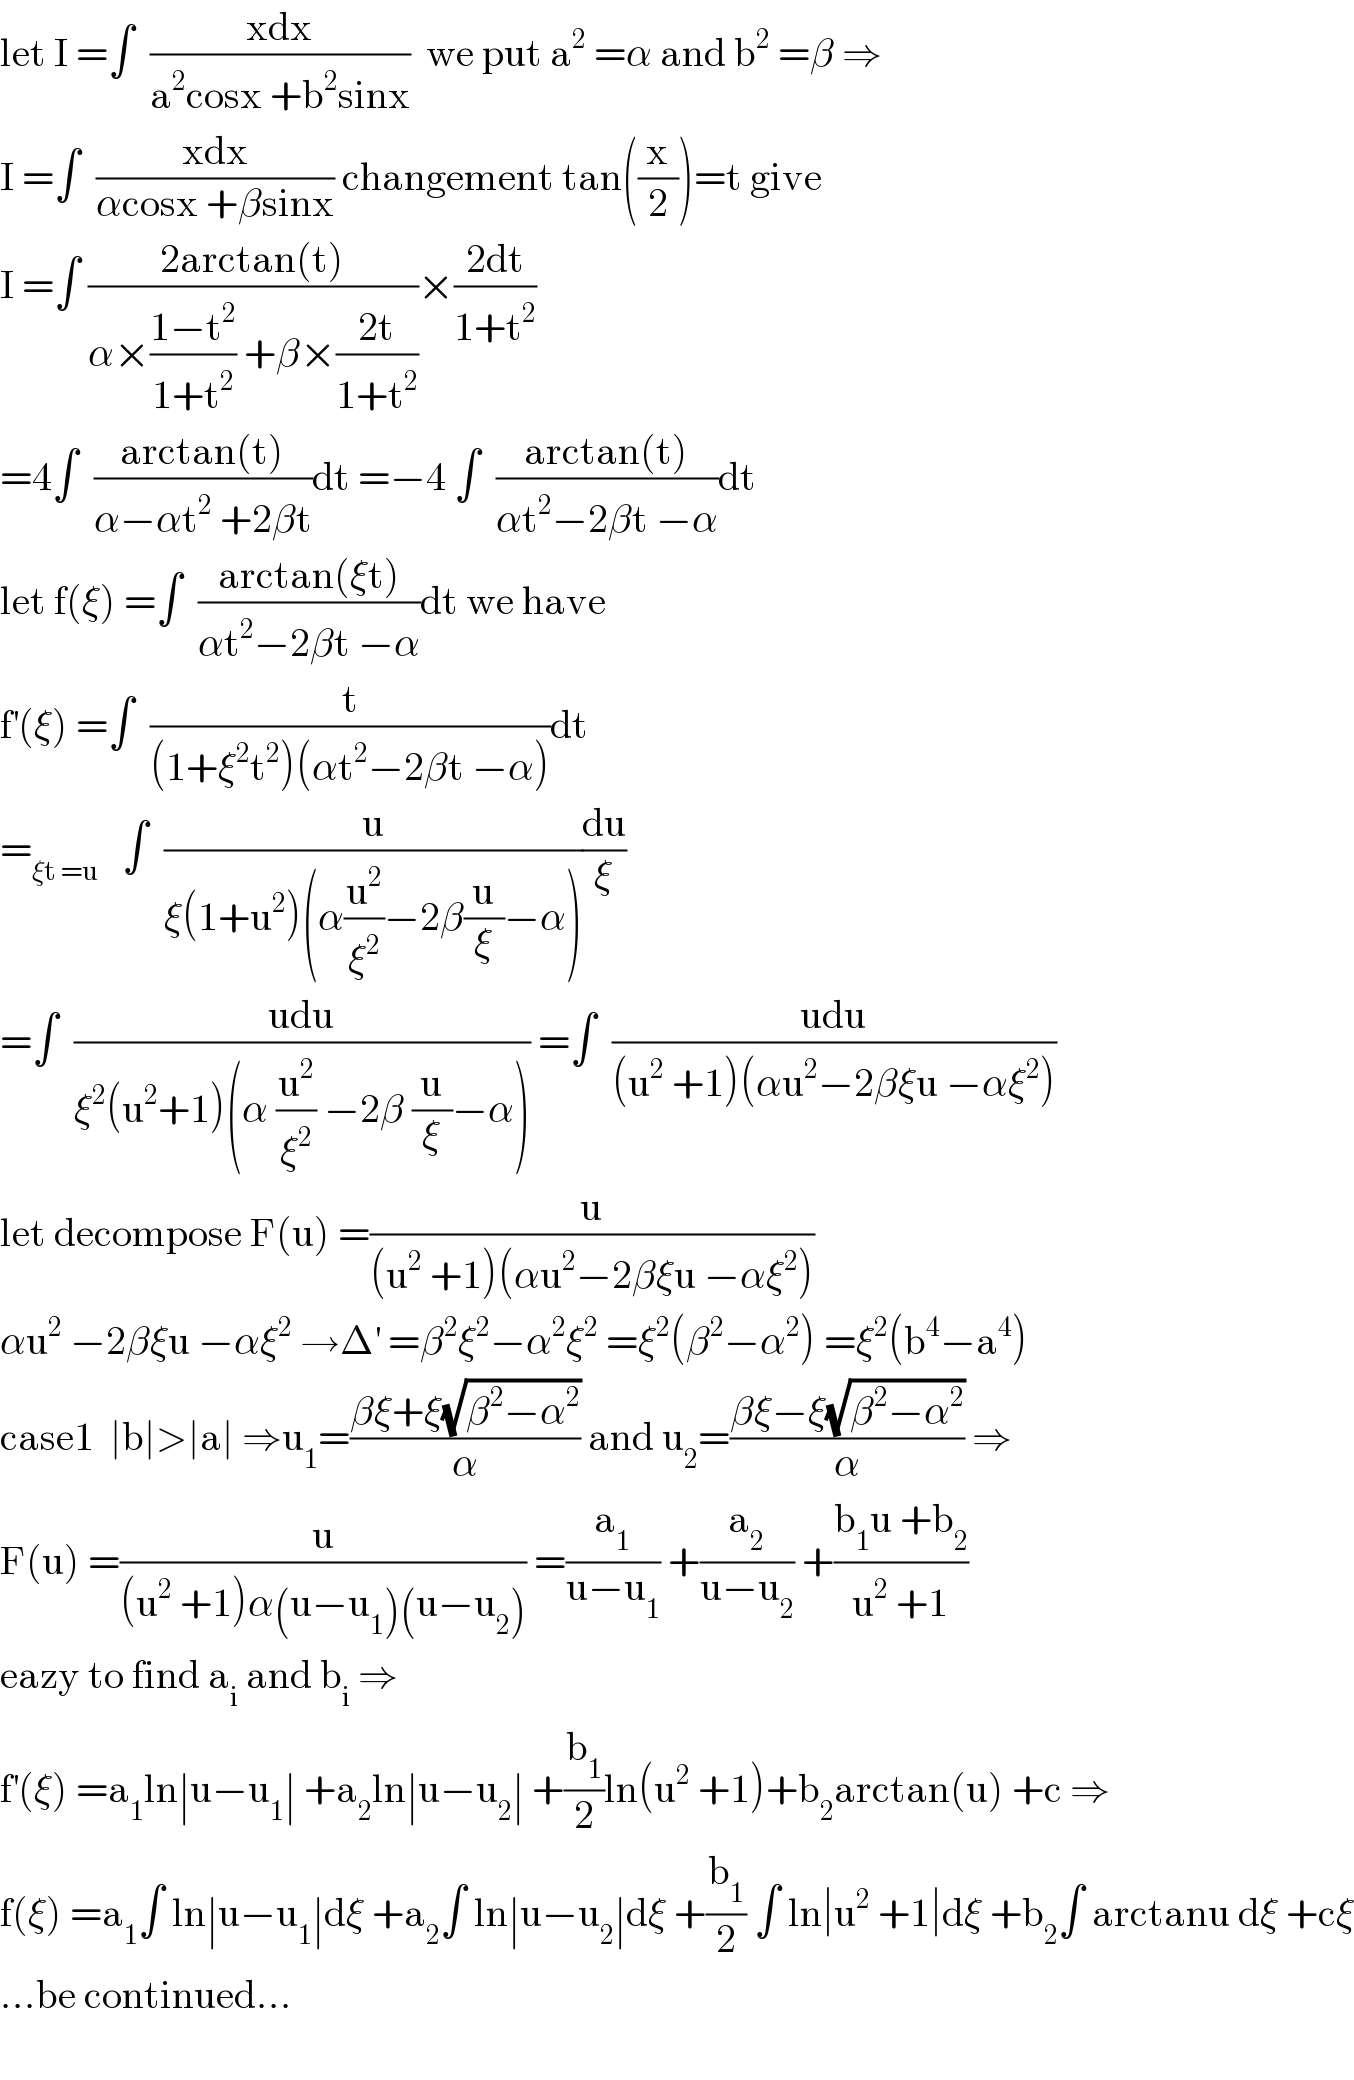 let I =∫  ((xdx)/(a^2 cosx +b^2 sinx))  we put a^2  =α and b^2  =β ⇒  I =∫  ((xdx)/(αcosx +βsinx)) changement tan((x/2))=t give  I =∫ ((2arctan(t))/(α×((1−t^2 )/(1+t^2 )) +β×((2t)/(1+t^2 ))))×((2dt)/(1+t^2 ))  =4∫  ((arctan(t))/(α−αt^2  +2βt))dt =−4 ∫  ((arctan(t))/(αt^2 −2βt −α))dt  let f(ξ) =∫  ((arctan(ξt))/(αt^2 −2βt −α))dt we have   f^′ (ξ) =∫  (t/((1+ξ^2 t^2 )(αt^2 −2βt −α)))dt  =_(ξt =u)    ∫  (u/(ξ(1+u^2 )(α(u^2 /ξ^2 )−2β(u/ξ)−α)))(du/ξ)  =∫  ((udu)/(ξ^2 (u^2 +1)(α (u^2 /ξ^2 ) −2β (u/ξ)−α))) =∫  ((udu)/((u^2  +1)(αu^2 −2βξu −αξ^2 )))  let decompose F(u) =(u/((u^2  +1)(αu^2 −2βξu −αξ^2 )))  αu^2  −2βξu −αξ^2  →Δ^′  =β^2 ξ^2 −α^2 ξ^2  =ξ^2 (β^2 −α^2 ) =ξ^2 (b^4 −a^4 )  case1  ∣b∣>∣a∣ ⇒u_1 =((βξ+ξ(√(β^2 −α^2 )))/α) and u_2 =((βξ−ξ(√(β^2 −α^2 )))/α) ⇒  F(u) =(u/((u^2  +1)α(u−u_1 )(u−u_2 ))) =(a_1 /(u−u_1 )) +(a_2 /(u−u_2 )) +((b_1 u +b_2 )/(u^2  +1))  eazy to find a_i  and b_i  ⇒  f^′ (ξ) =a_1 ln∣u−u_1 ∣ +a_2 ln∣u−u_2 ∣ +(b_1 /2)ln(u^2  +1)+b_2 arctan(u) +c ⇒  f(ξ) =a_1 ∫ ln∣u−u_1 ∣dξ +a_2 ∫ ln∣u−u_2 ∣dξ +(b_1 /2) ∫ ln∣u^2  +1∣dξ +b_2 ∫ arctanu dξ +cξ  ...be continued...    